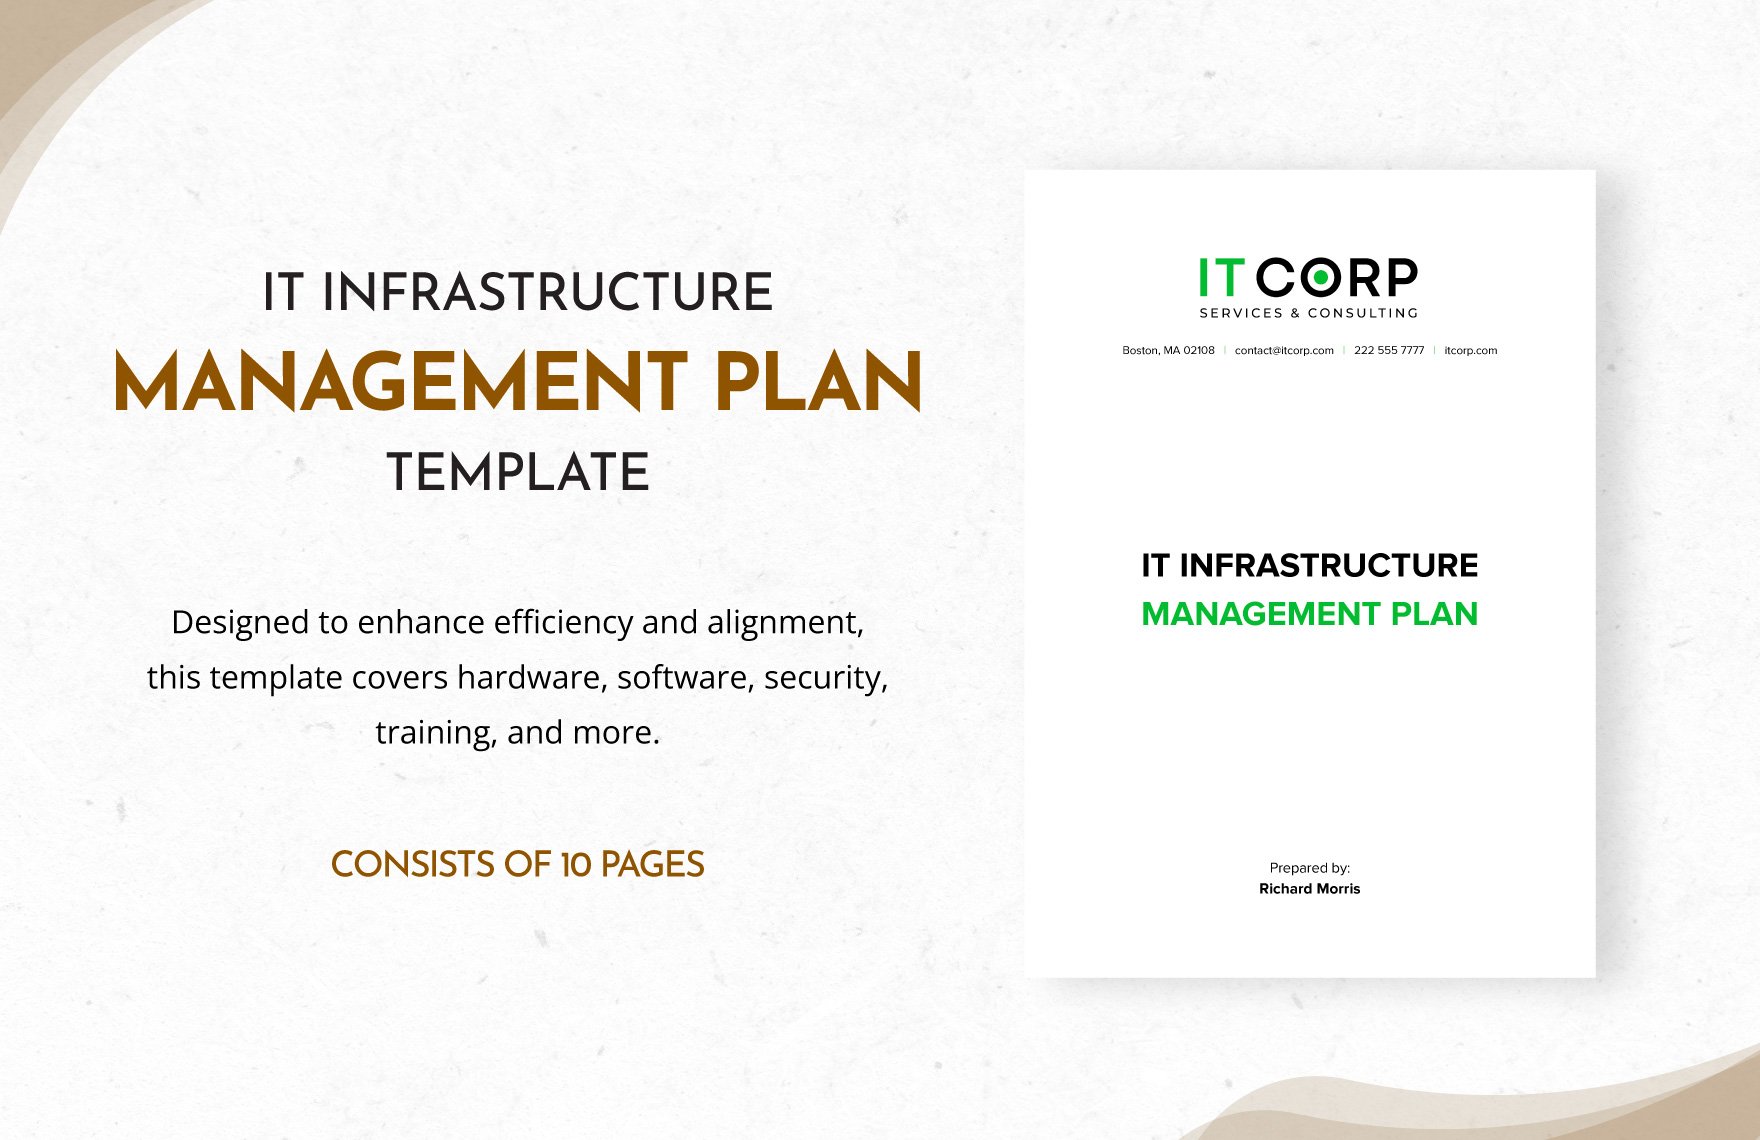 IT Infrastructure Management Plan Template in Word, Google Docs, PDF